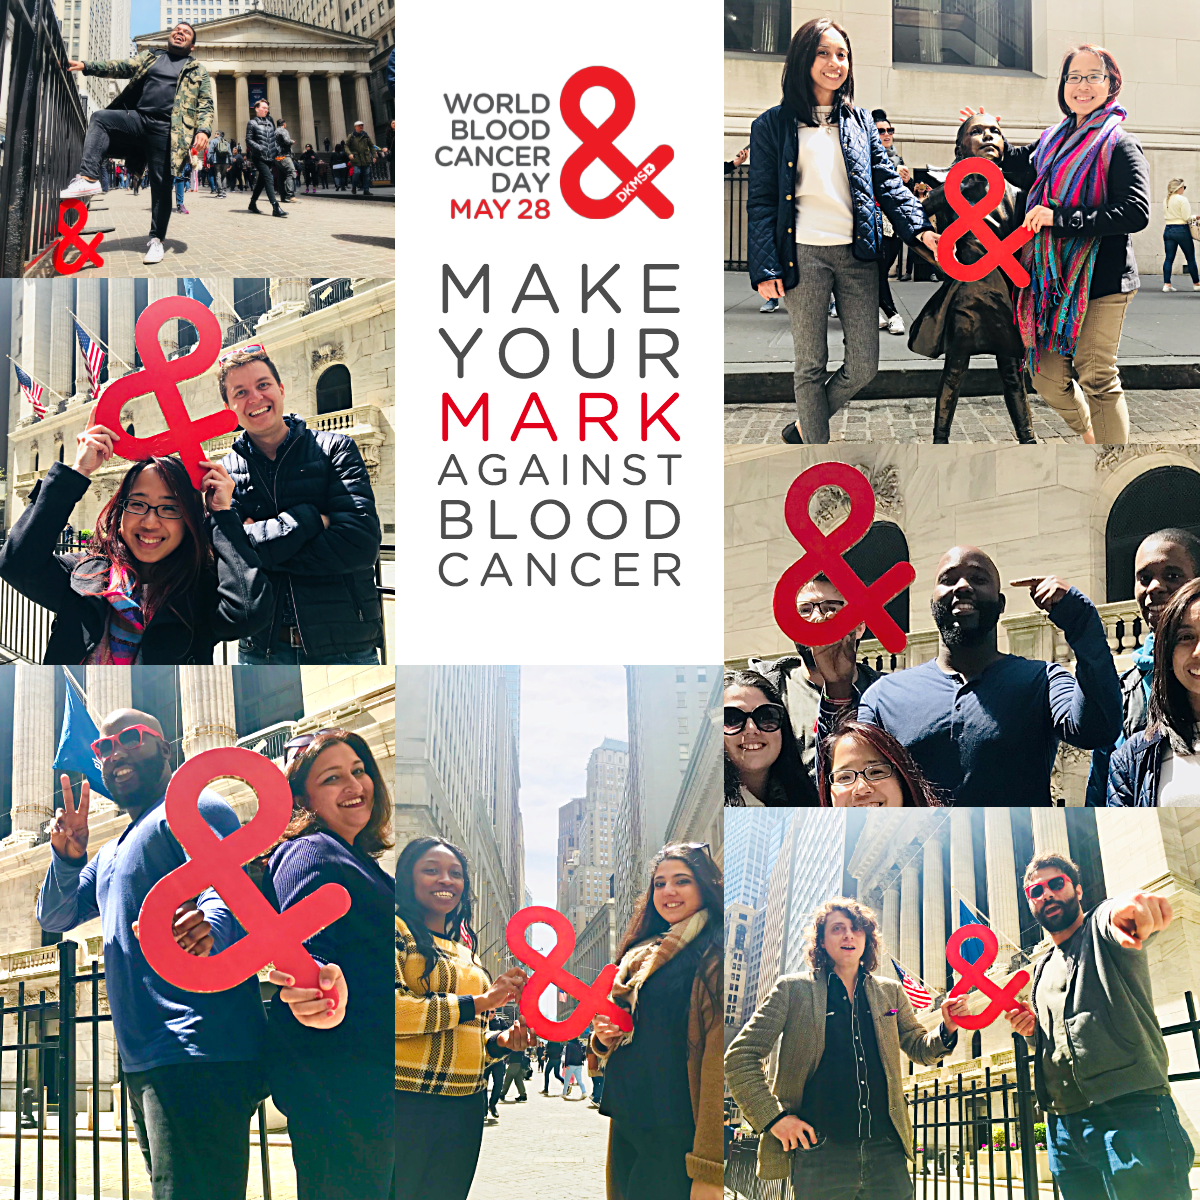 Individuals celebrating world blood cancer day by holding the ampersand symbol. 